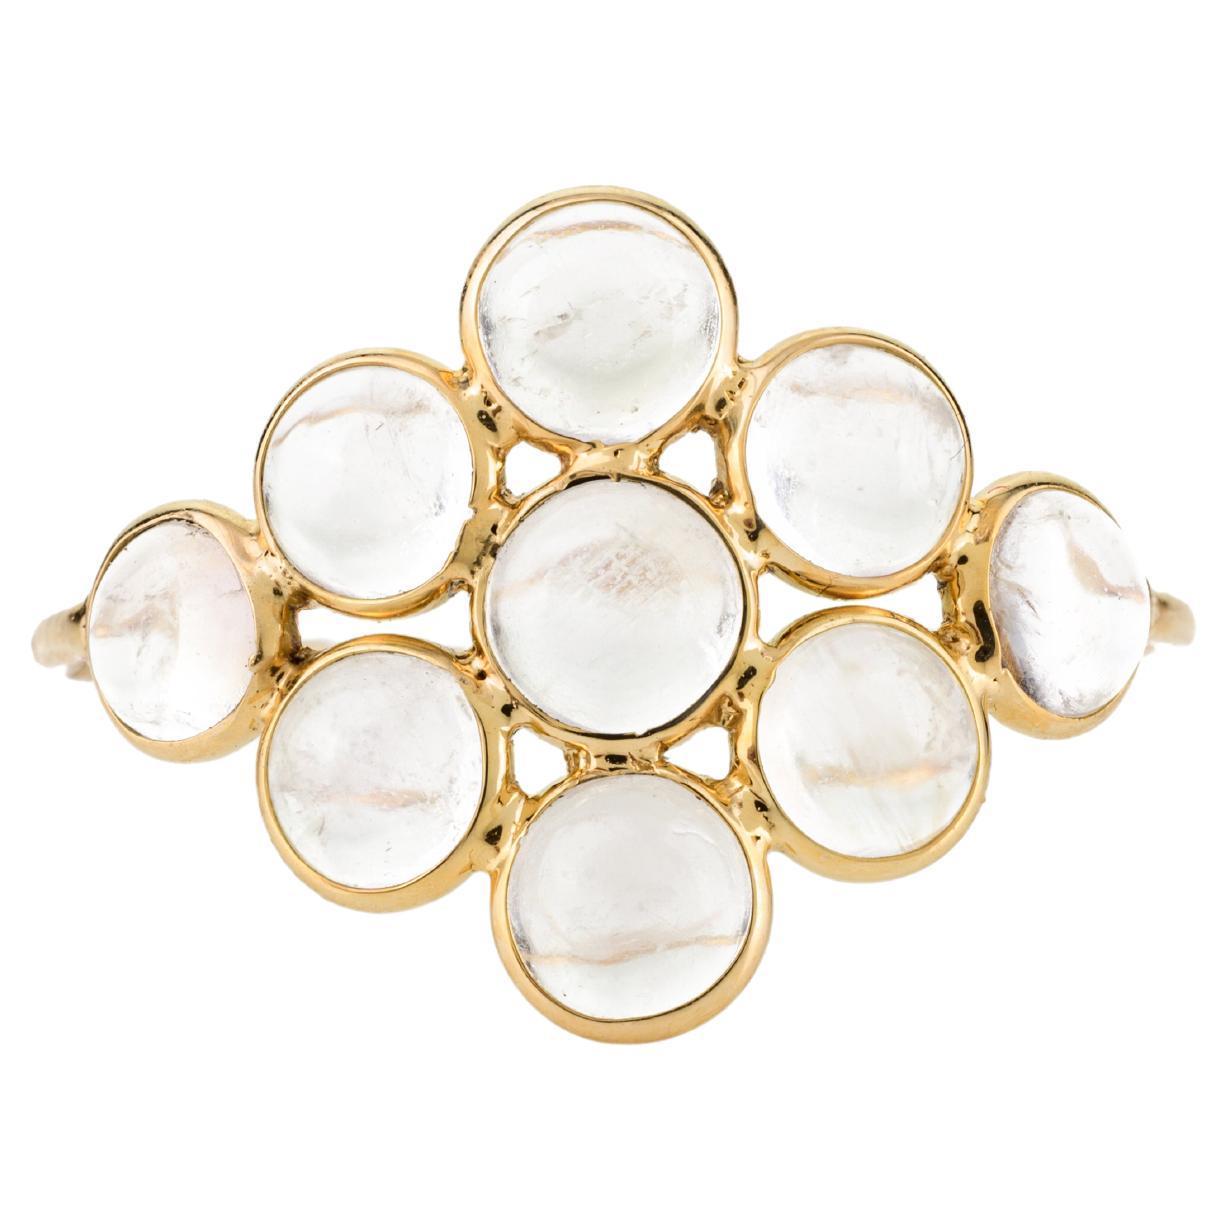 Rainbow Moonstone Cluster Flower Ring in 18k Solid Yellow Gold